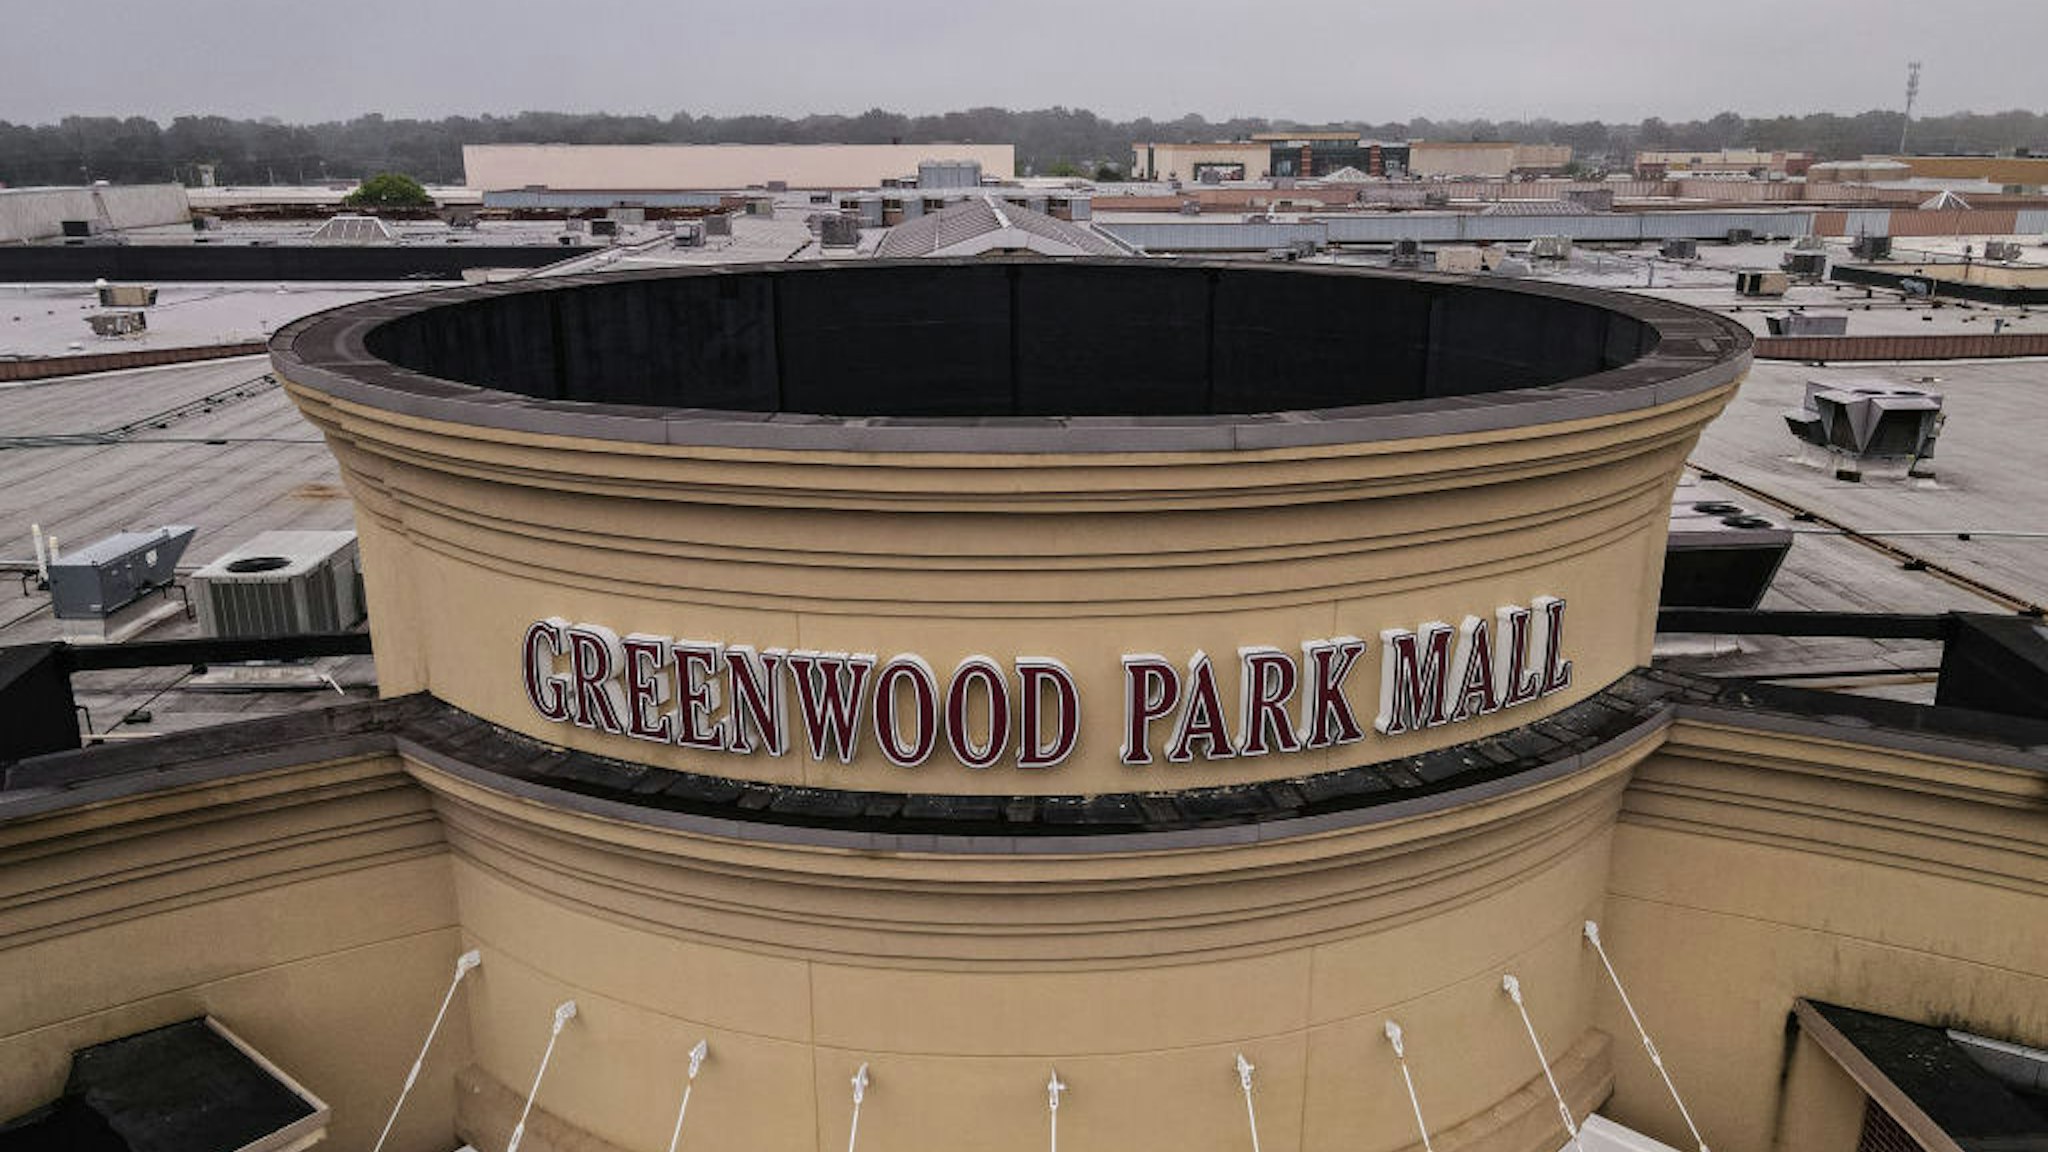 GREENWOOD, IN - JULY 18: In this aerial view, the main entrance of Greenwood Park Mall is seen on July 18, 2022 in Greenwood, Indiana. A gunman reportedly opened fire within the mall food court on July 17, killing three and injuring two before being killed by an armed bystander. (Photo by Jon Cherry/Getty Images)